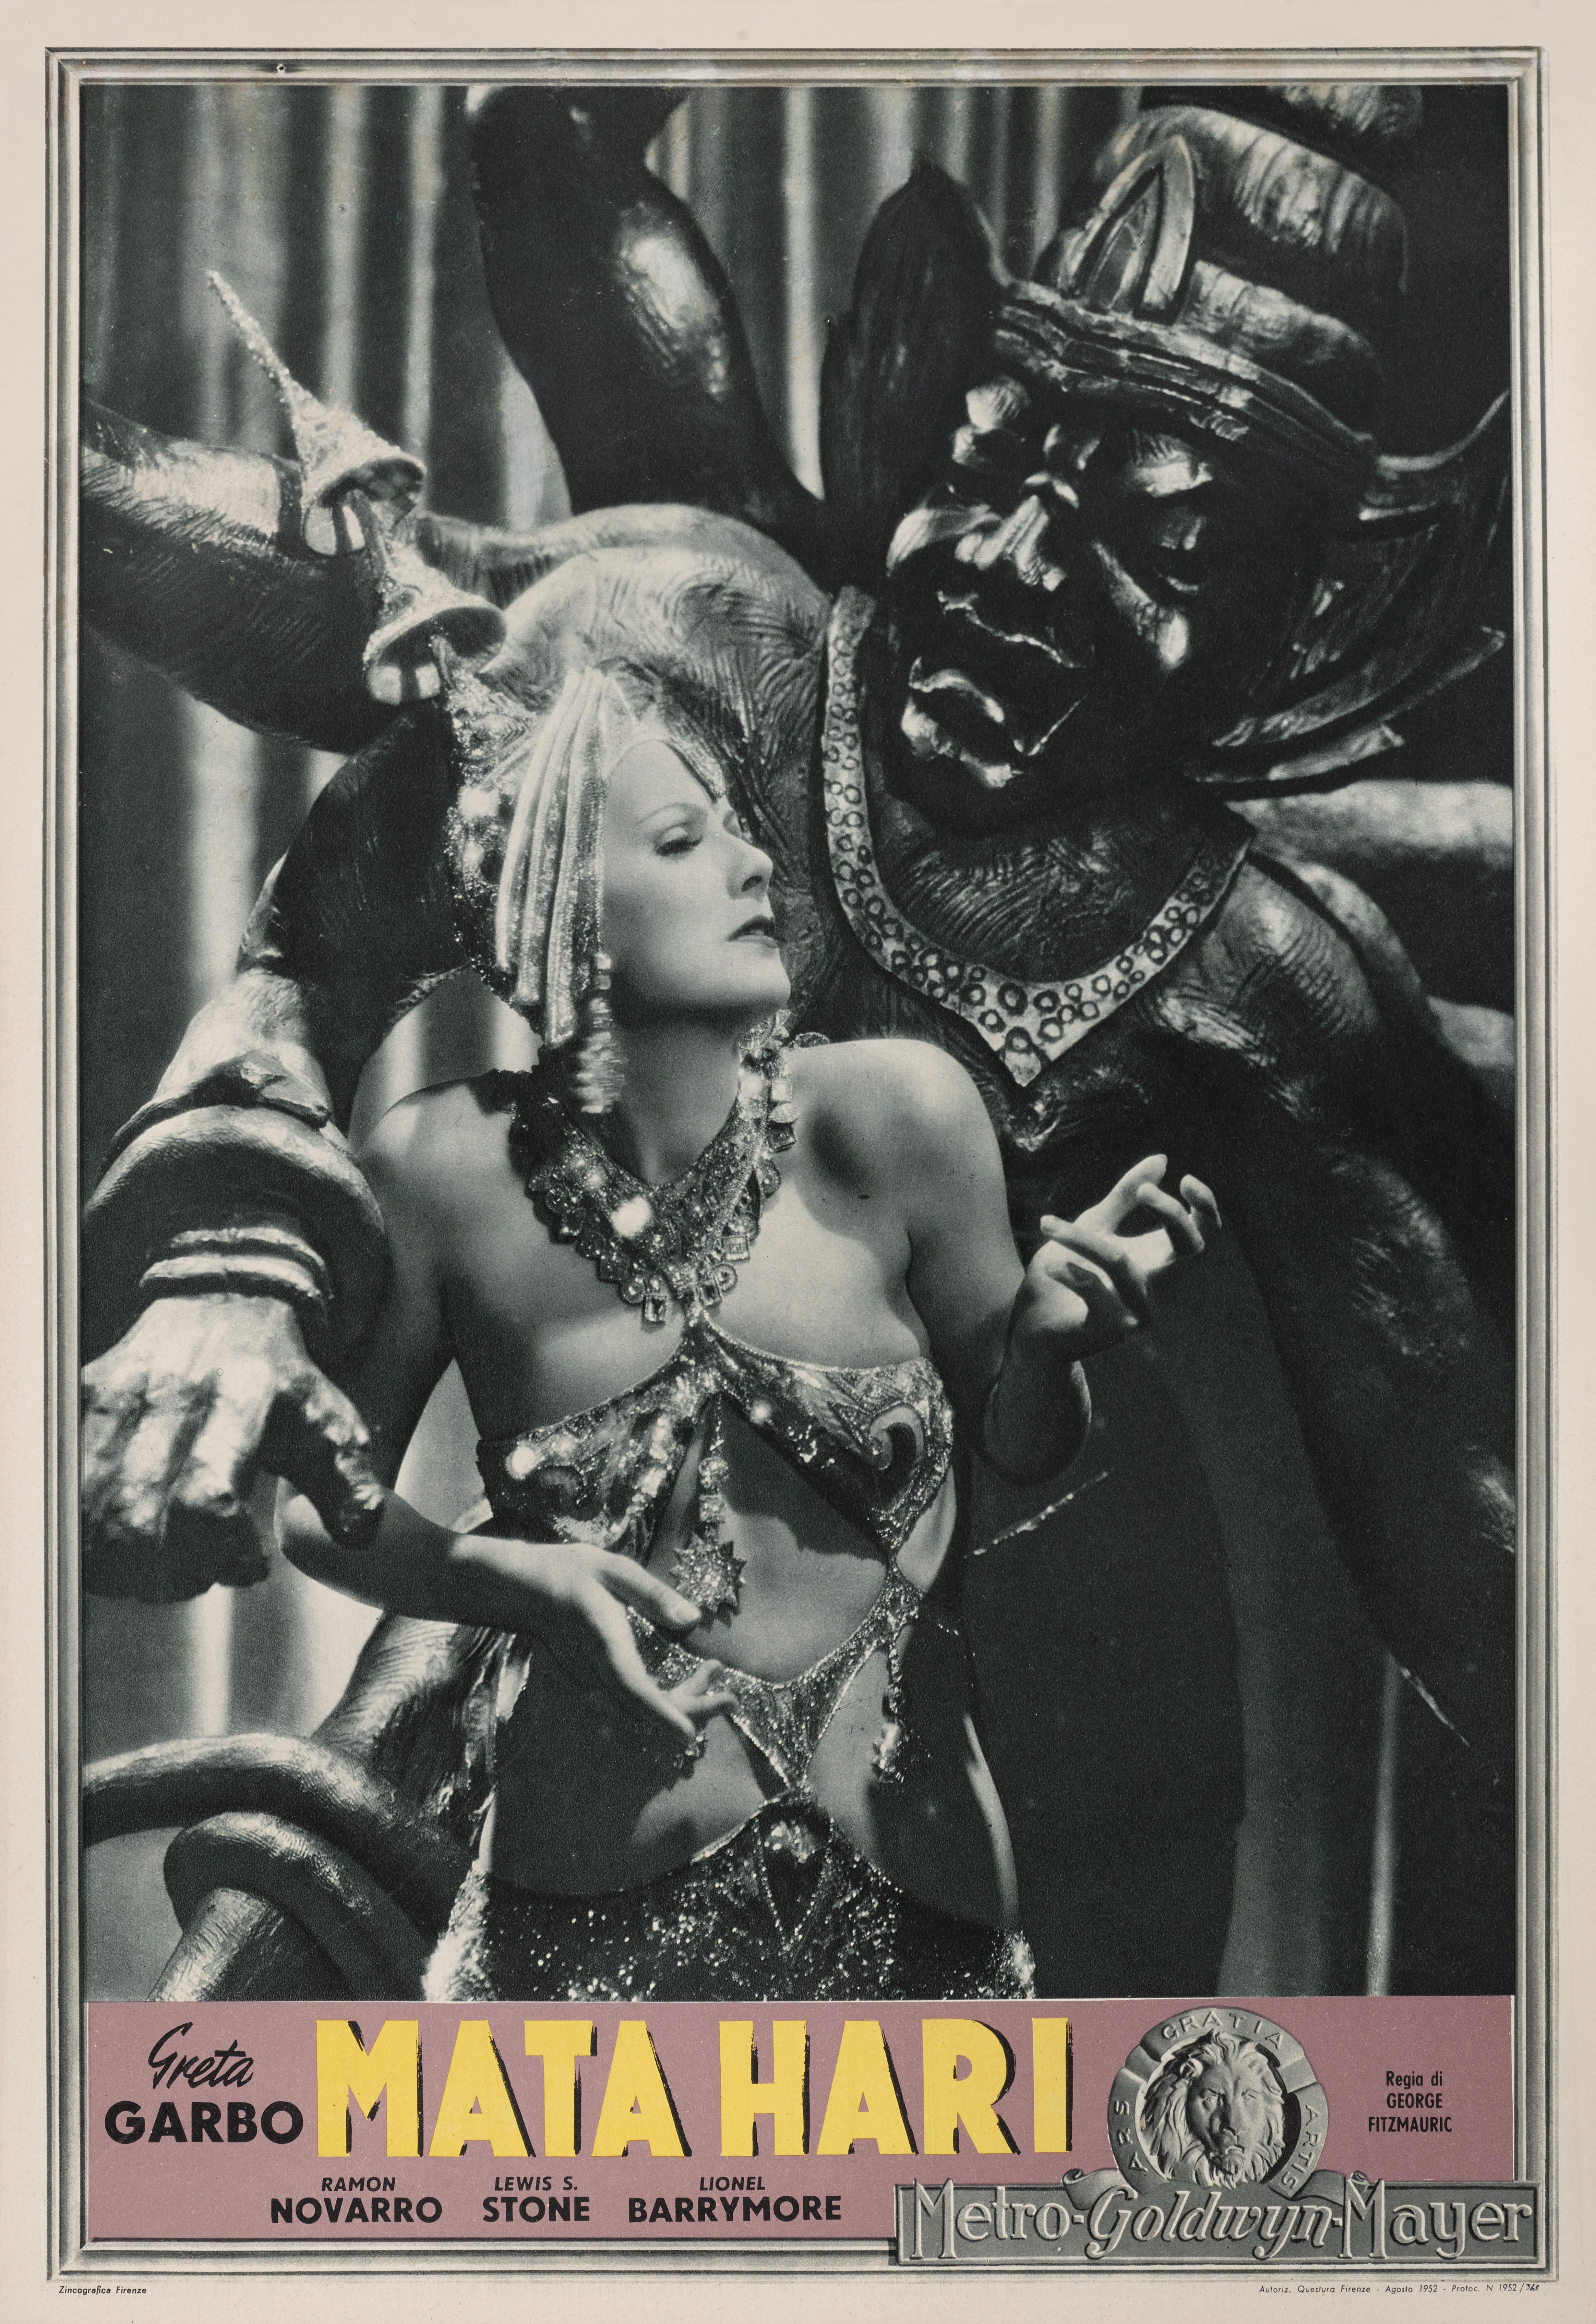 Original Italian film poster from the 1931 film that was broadly based on the life of Mata Hari, a Dutch exotic dancer and courtesan who was a German spy during World War I. Greta Garbo starred as the title role, alongside Ramon Novarro and Lionel